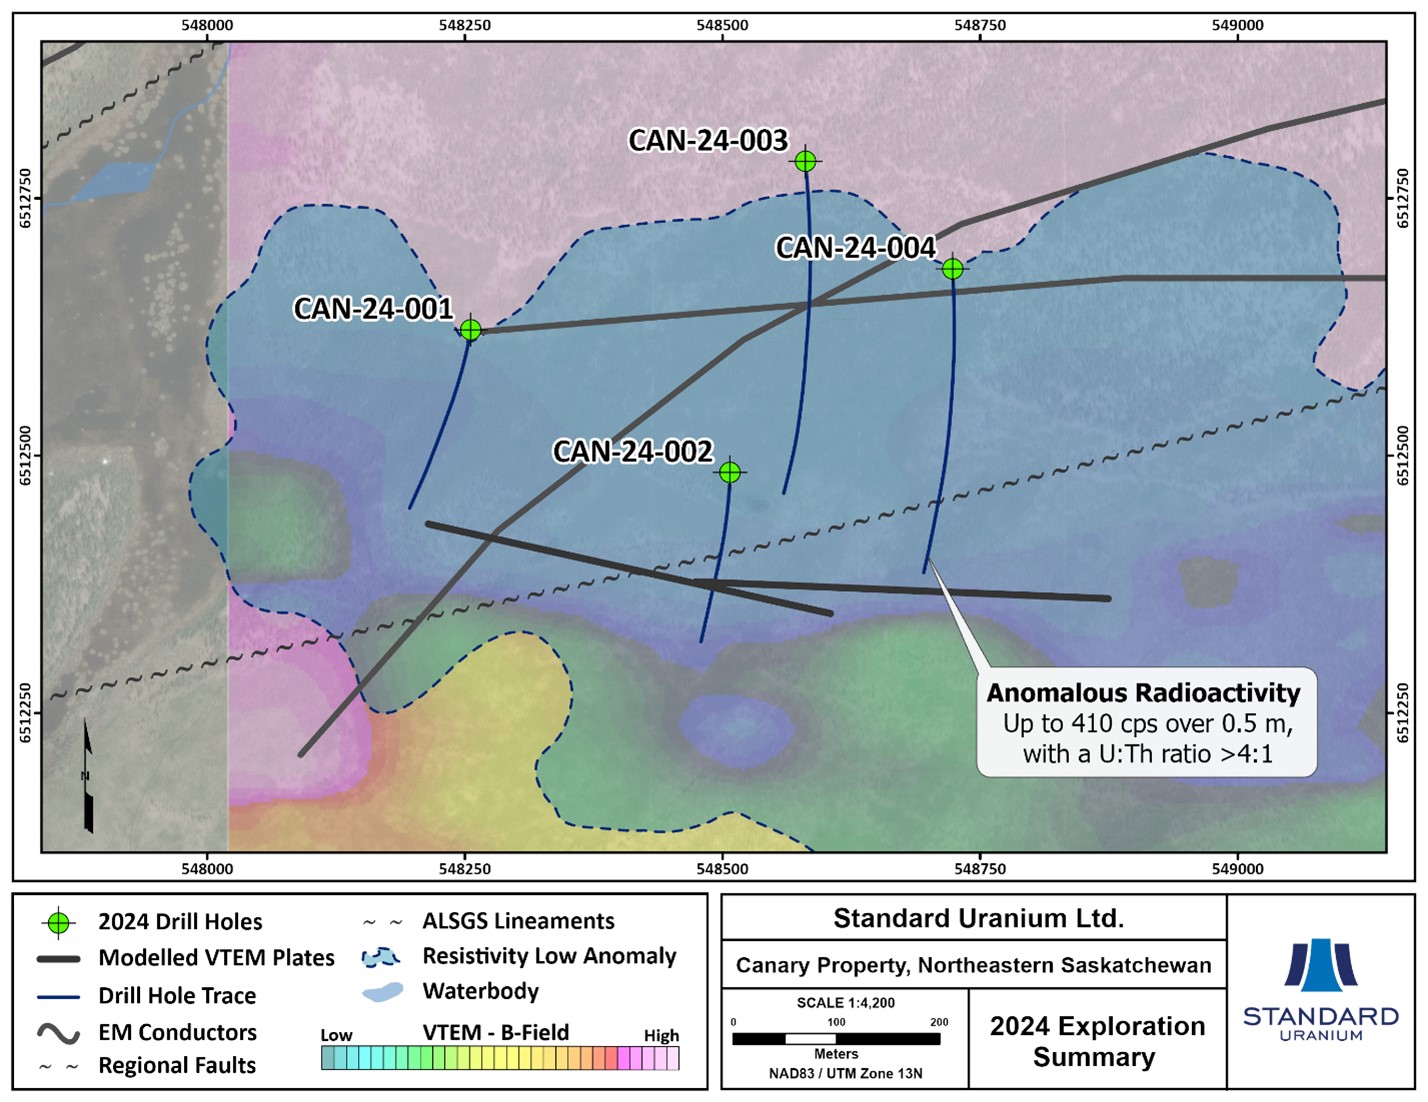 Map of the northern Canary conductor trend highlighting 2024 drill holes with 2008 VTEM in the background. The geophysical target area is defined by a significant resistivity low anomaly coinciding with EM conductors dipping to the north.